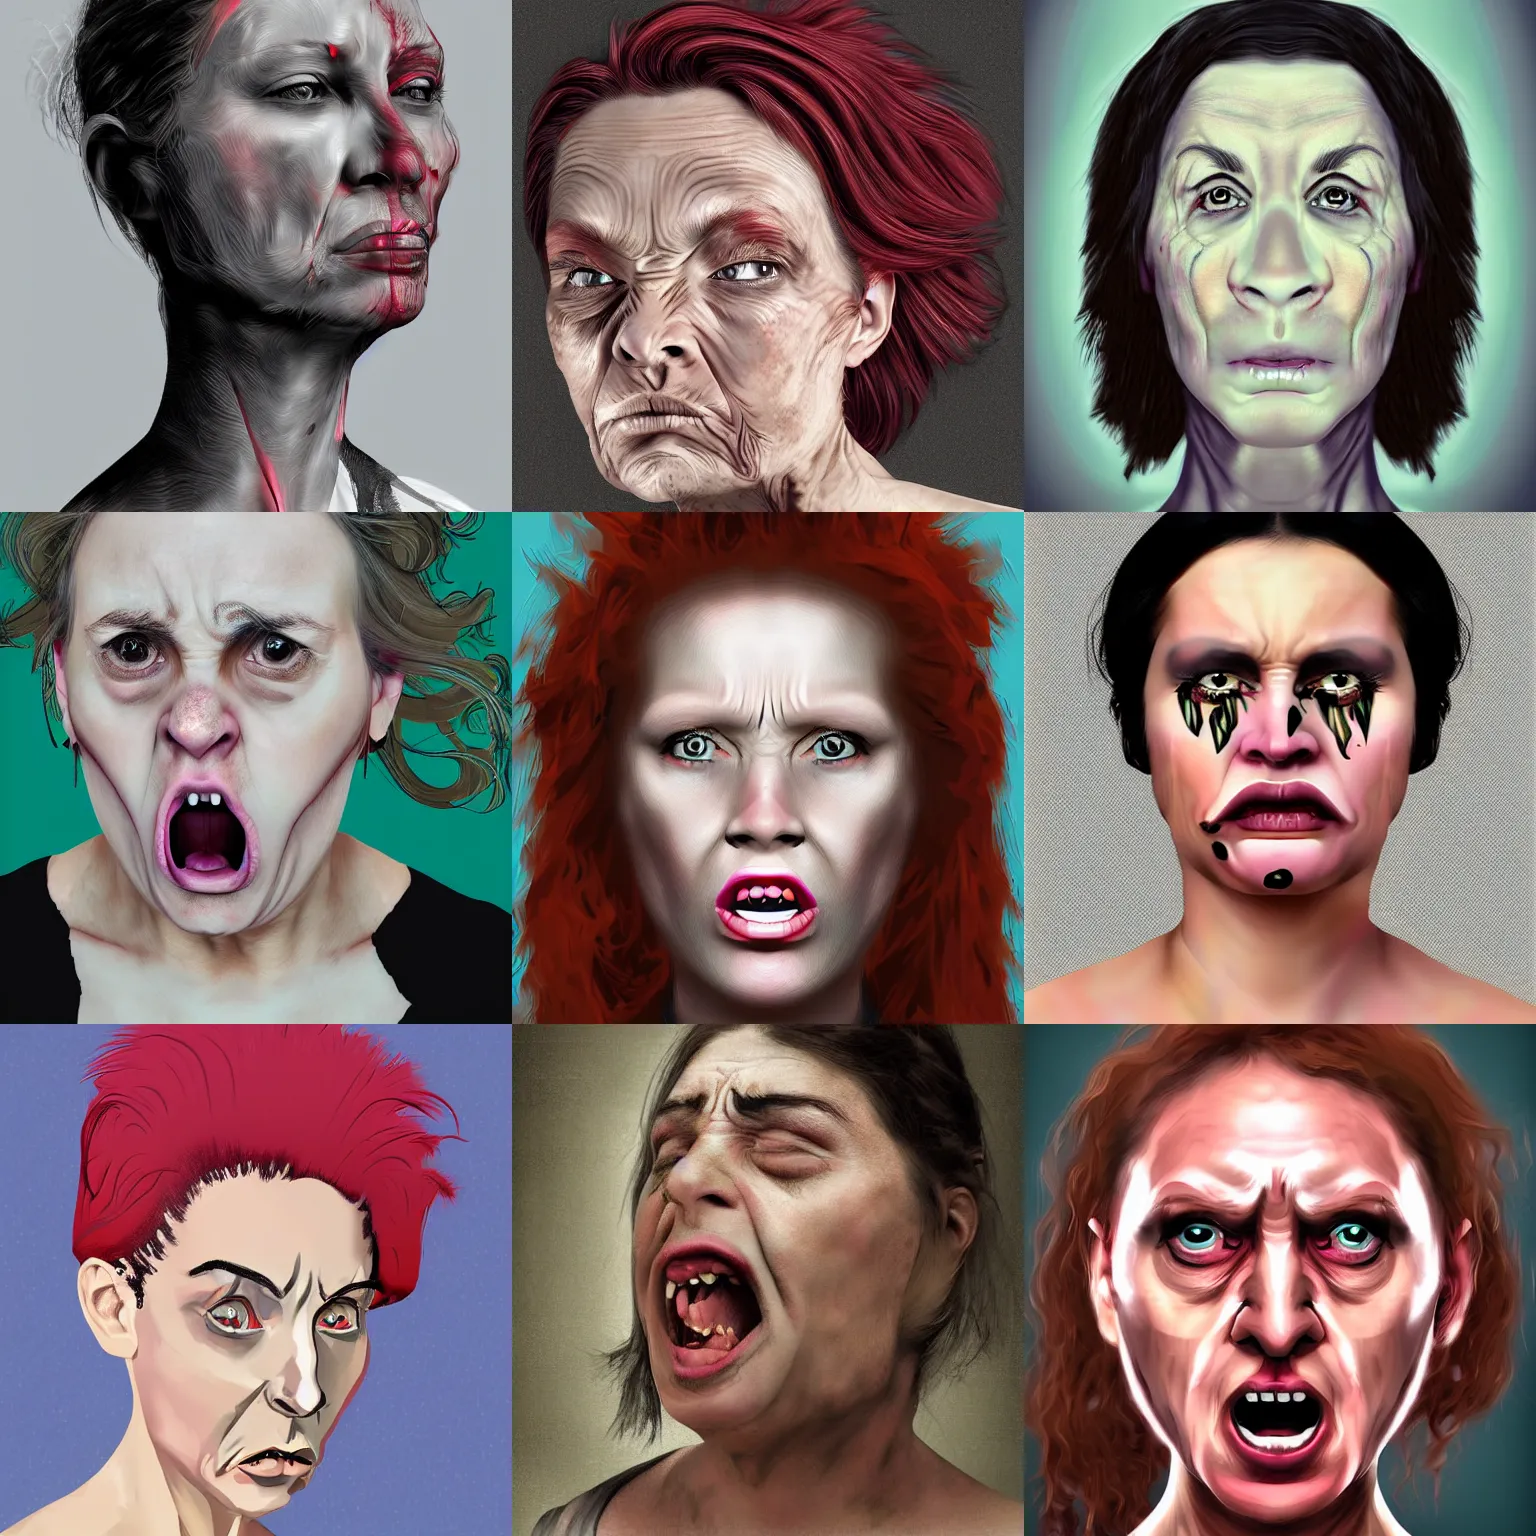 Prompt: an amazing digital art portrait of an ugly angry woman.